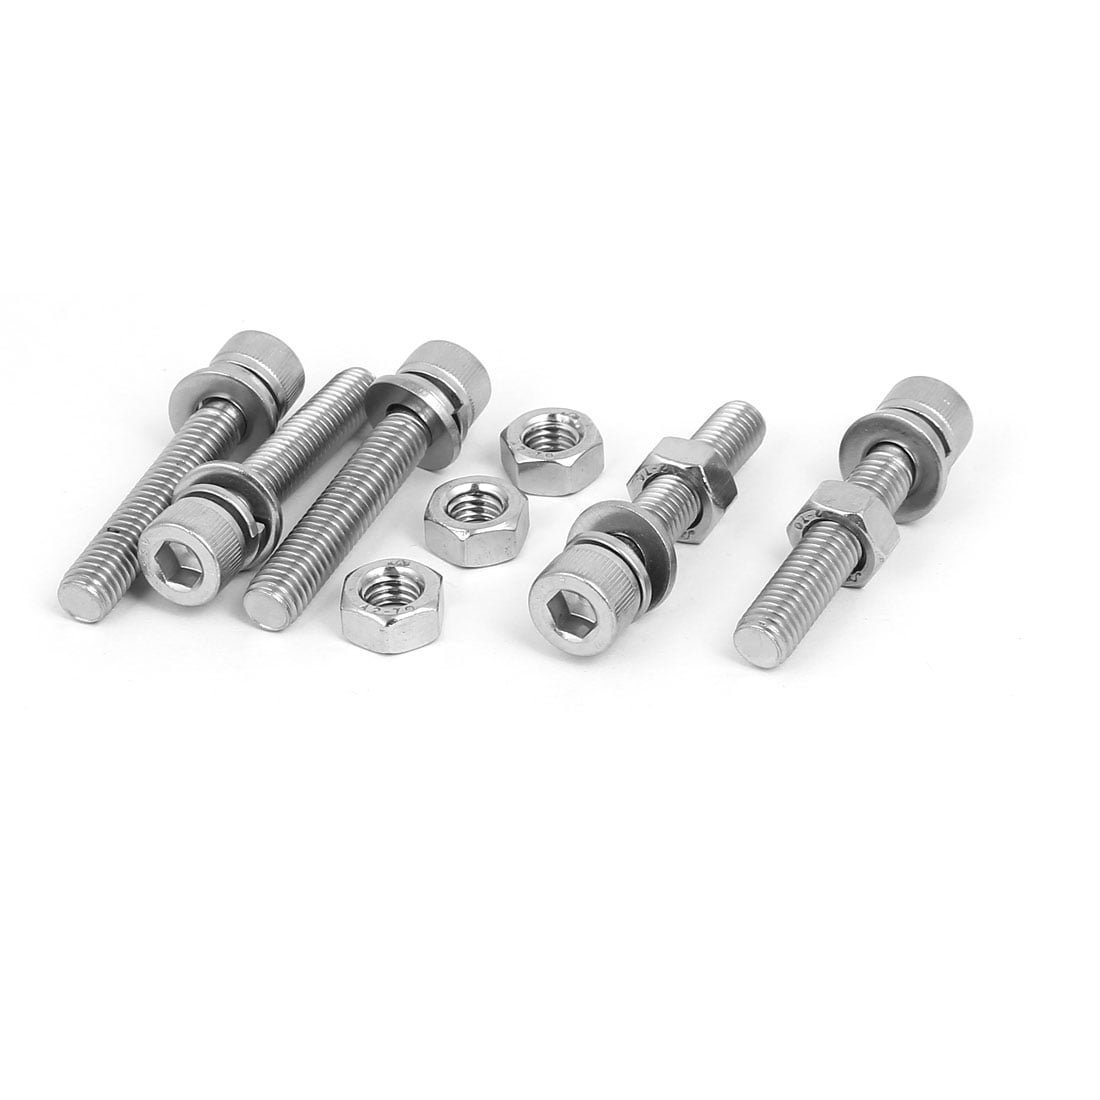 Stainless Steel Bolt & Washer Set M8 x 35mm Nut Drop Down Box Options 